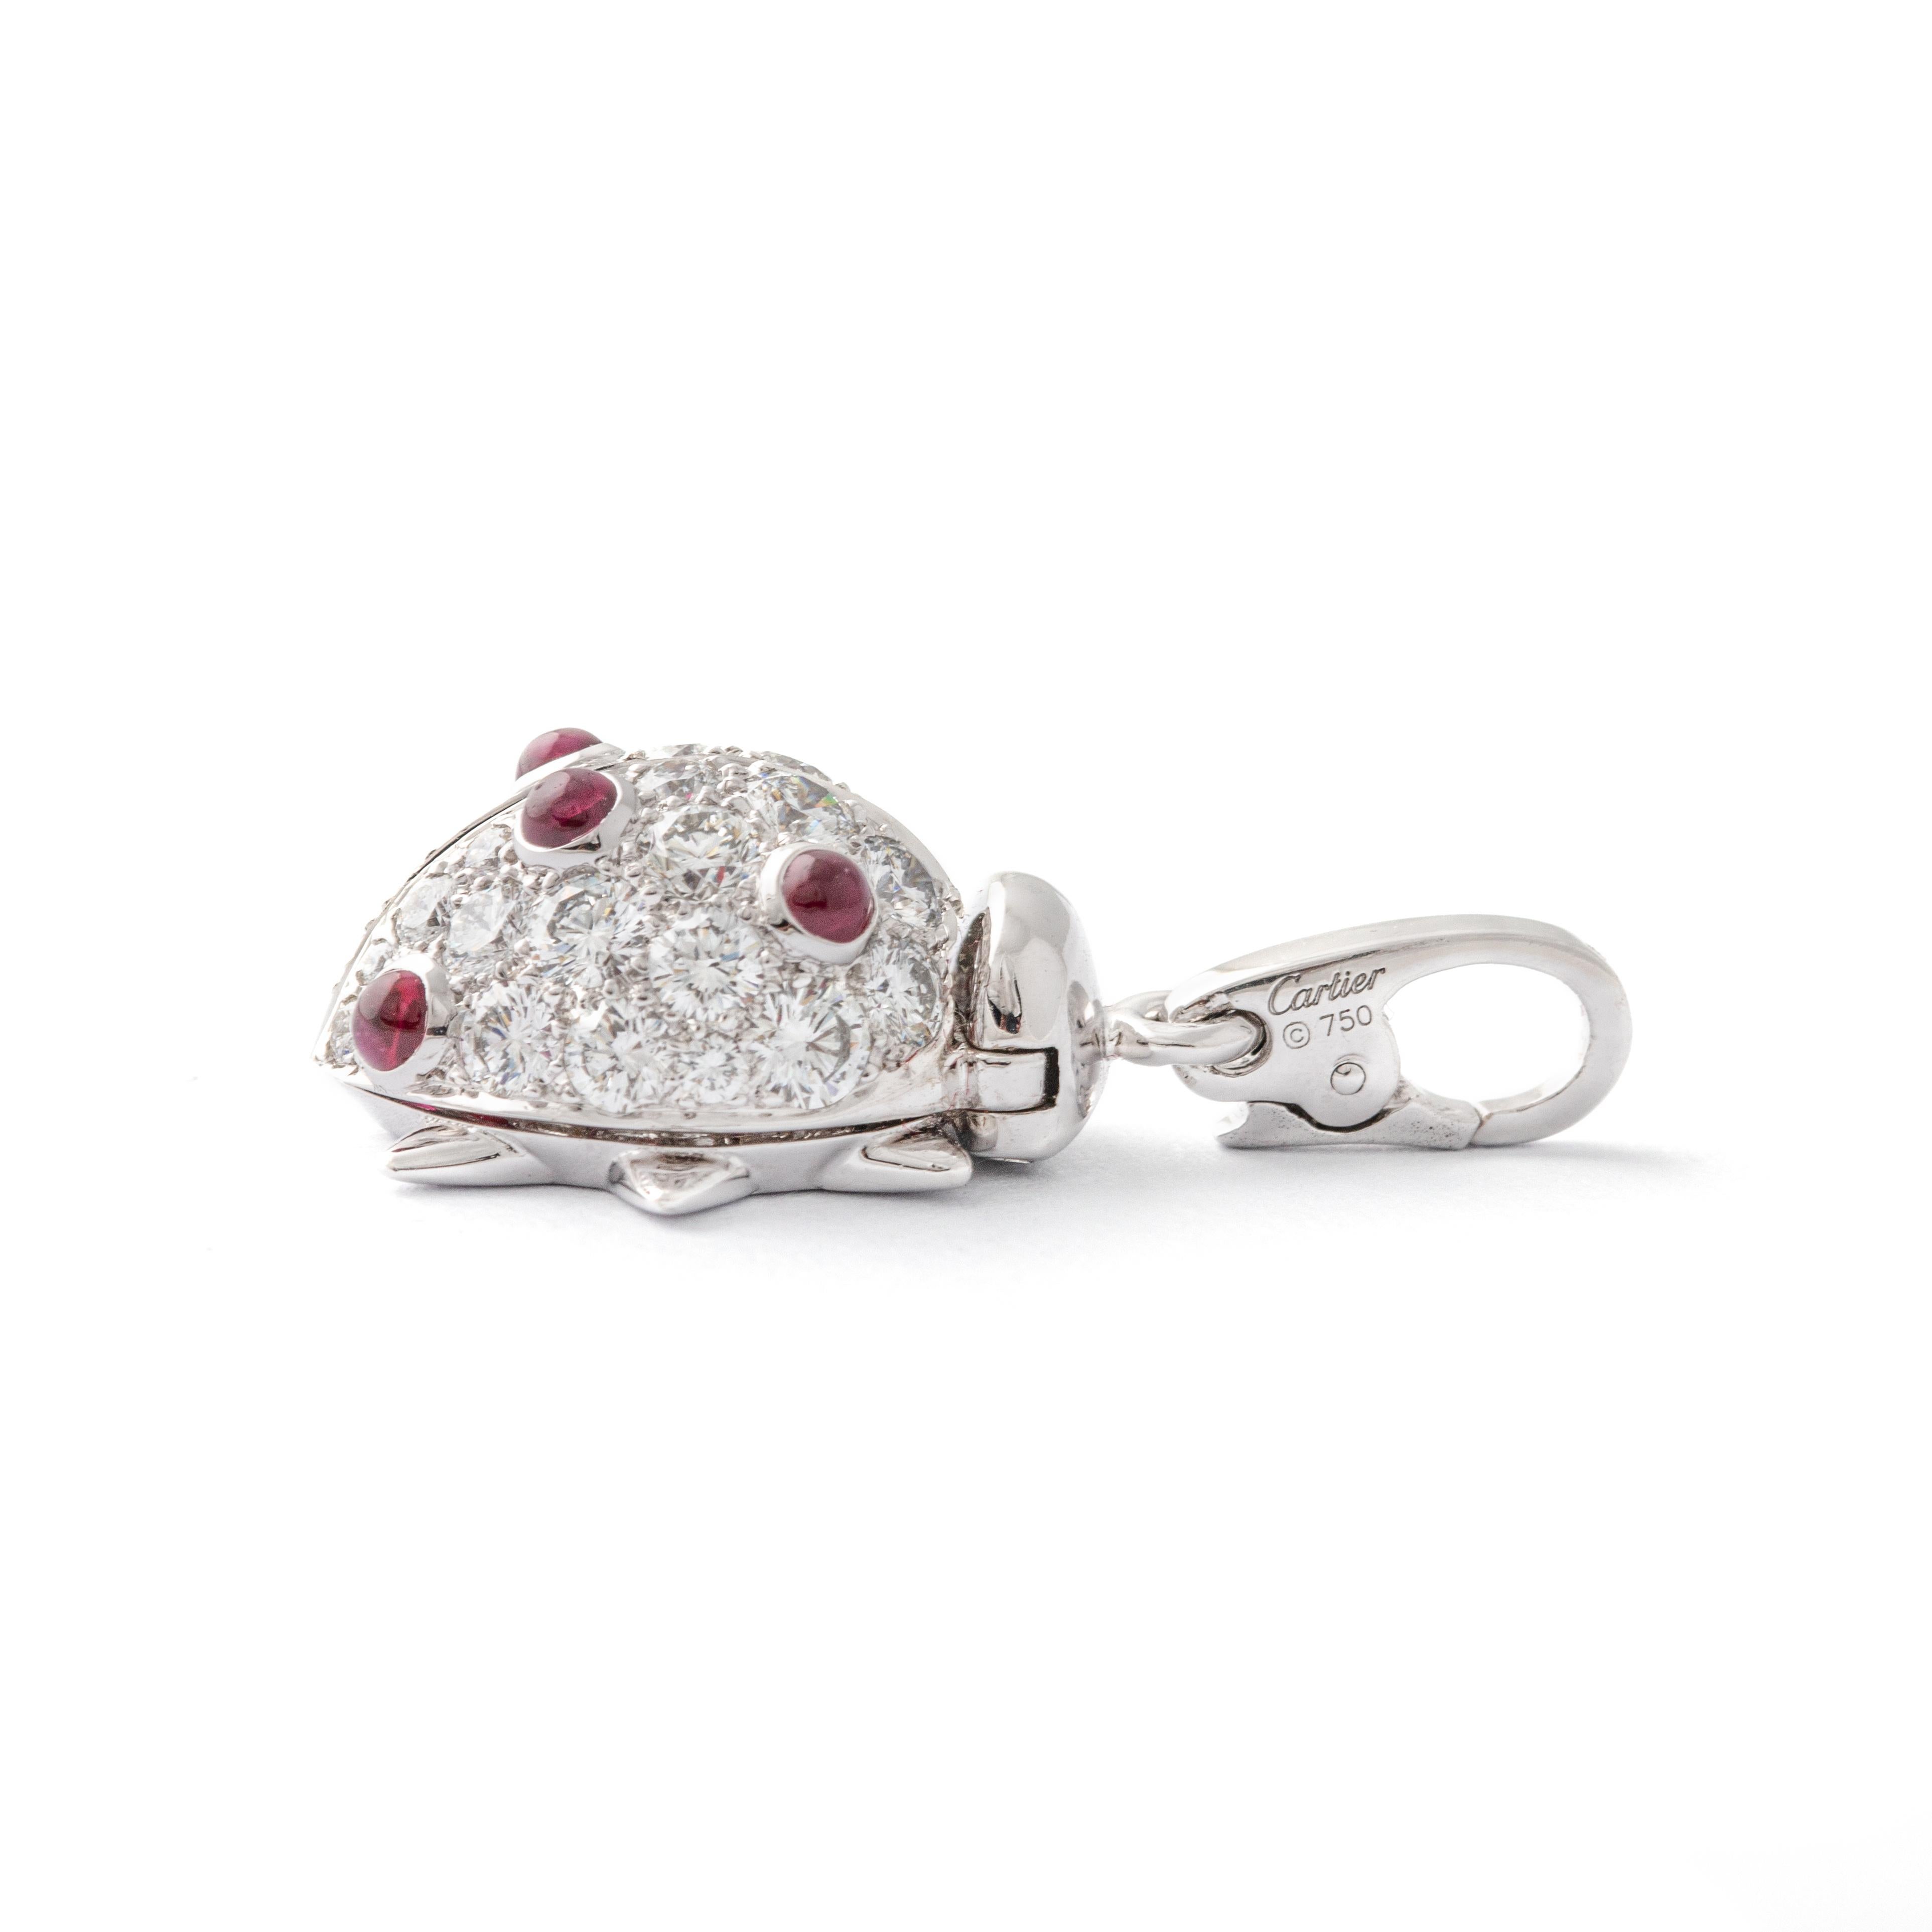 Cartier
Ruby and Diamond Charm Pendant,
